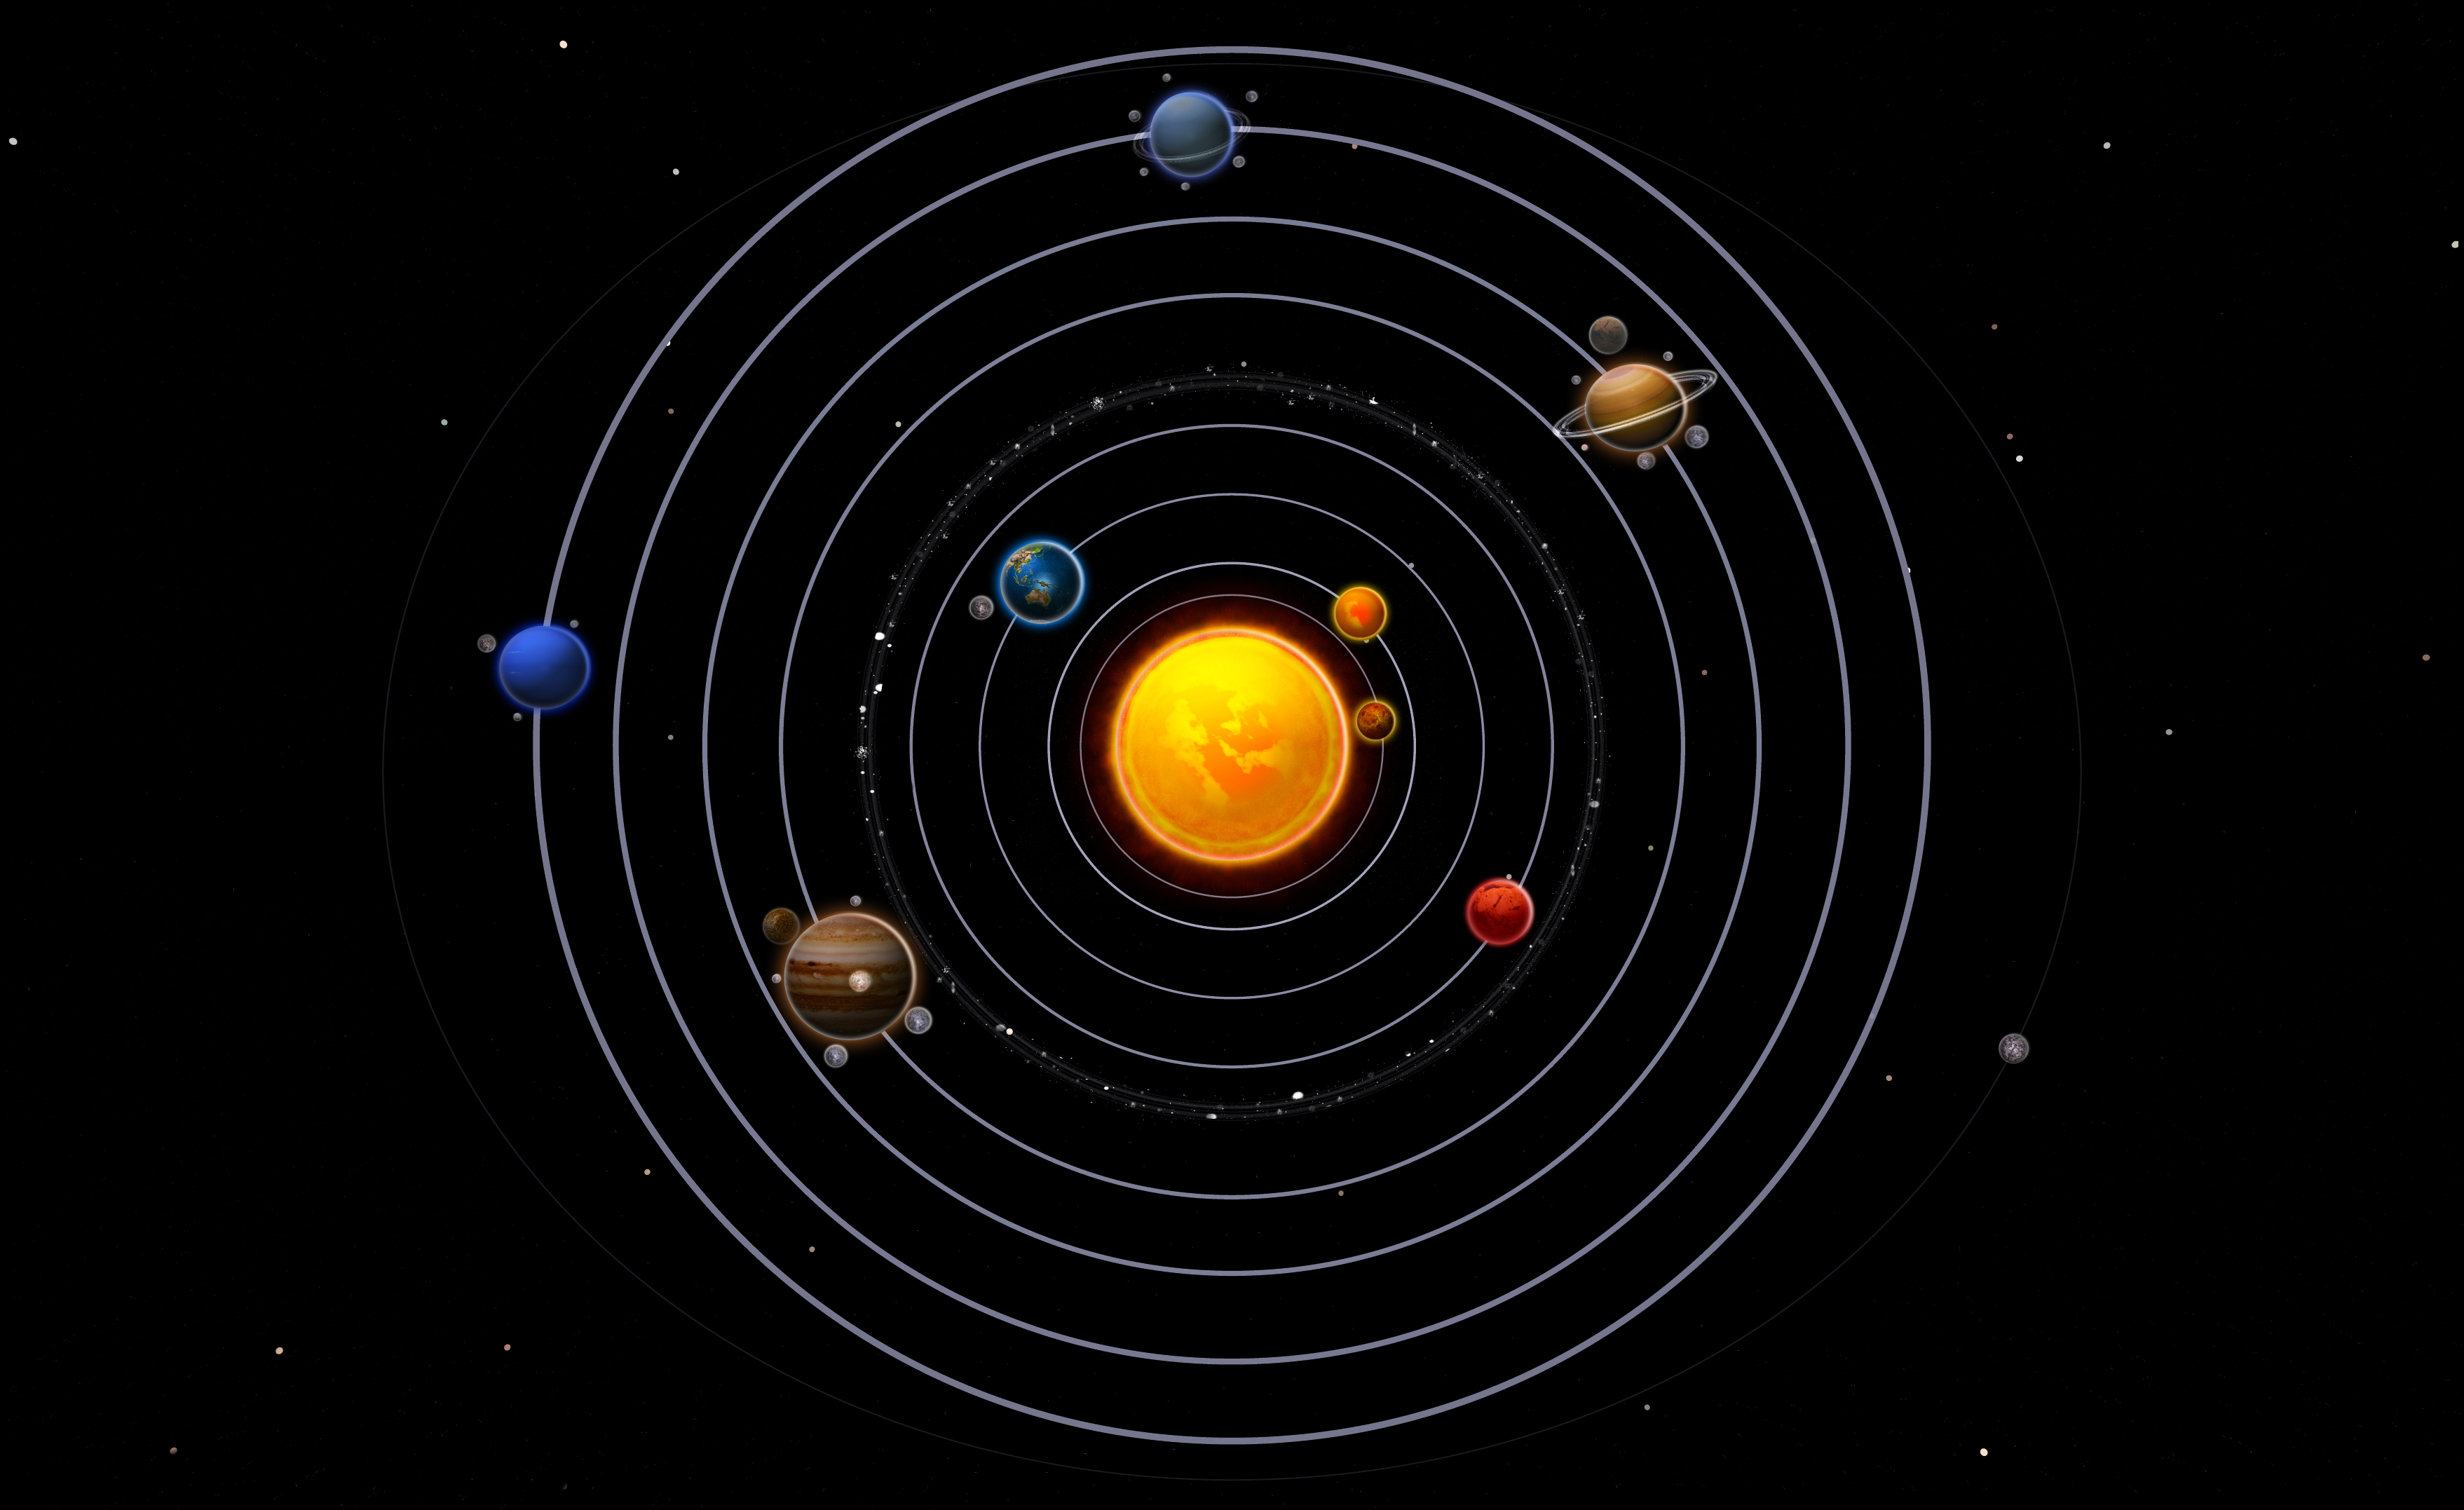 Solar System: The Definition, Sun, Planets and Other ...